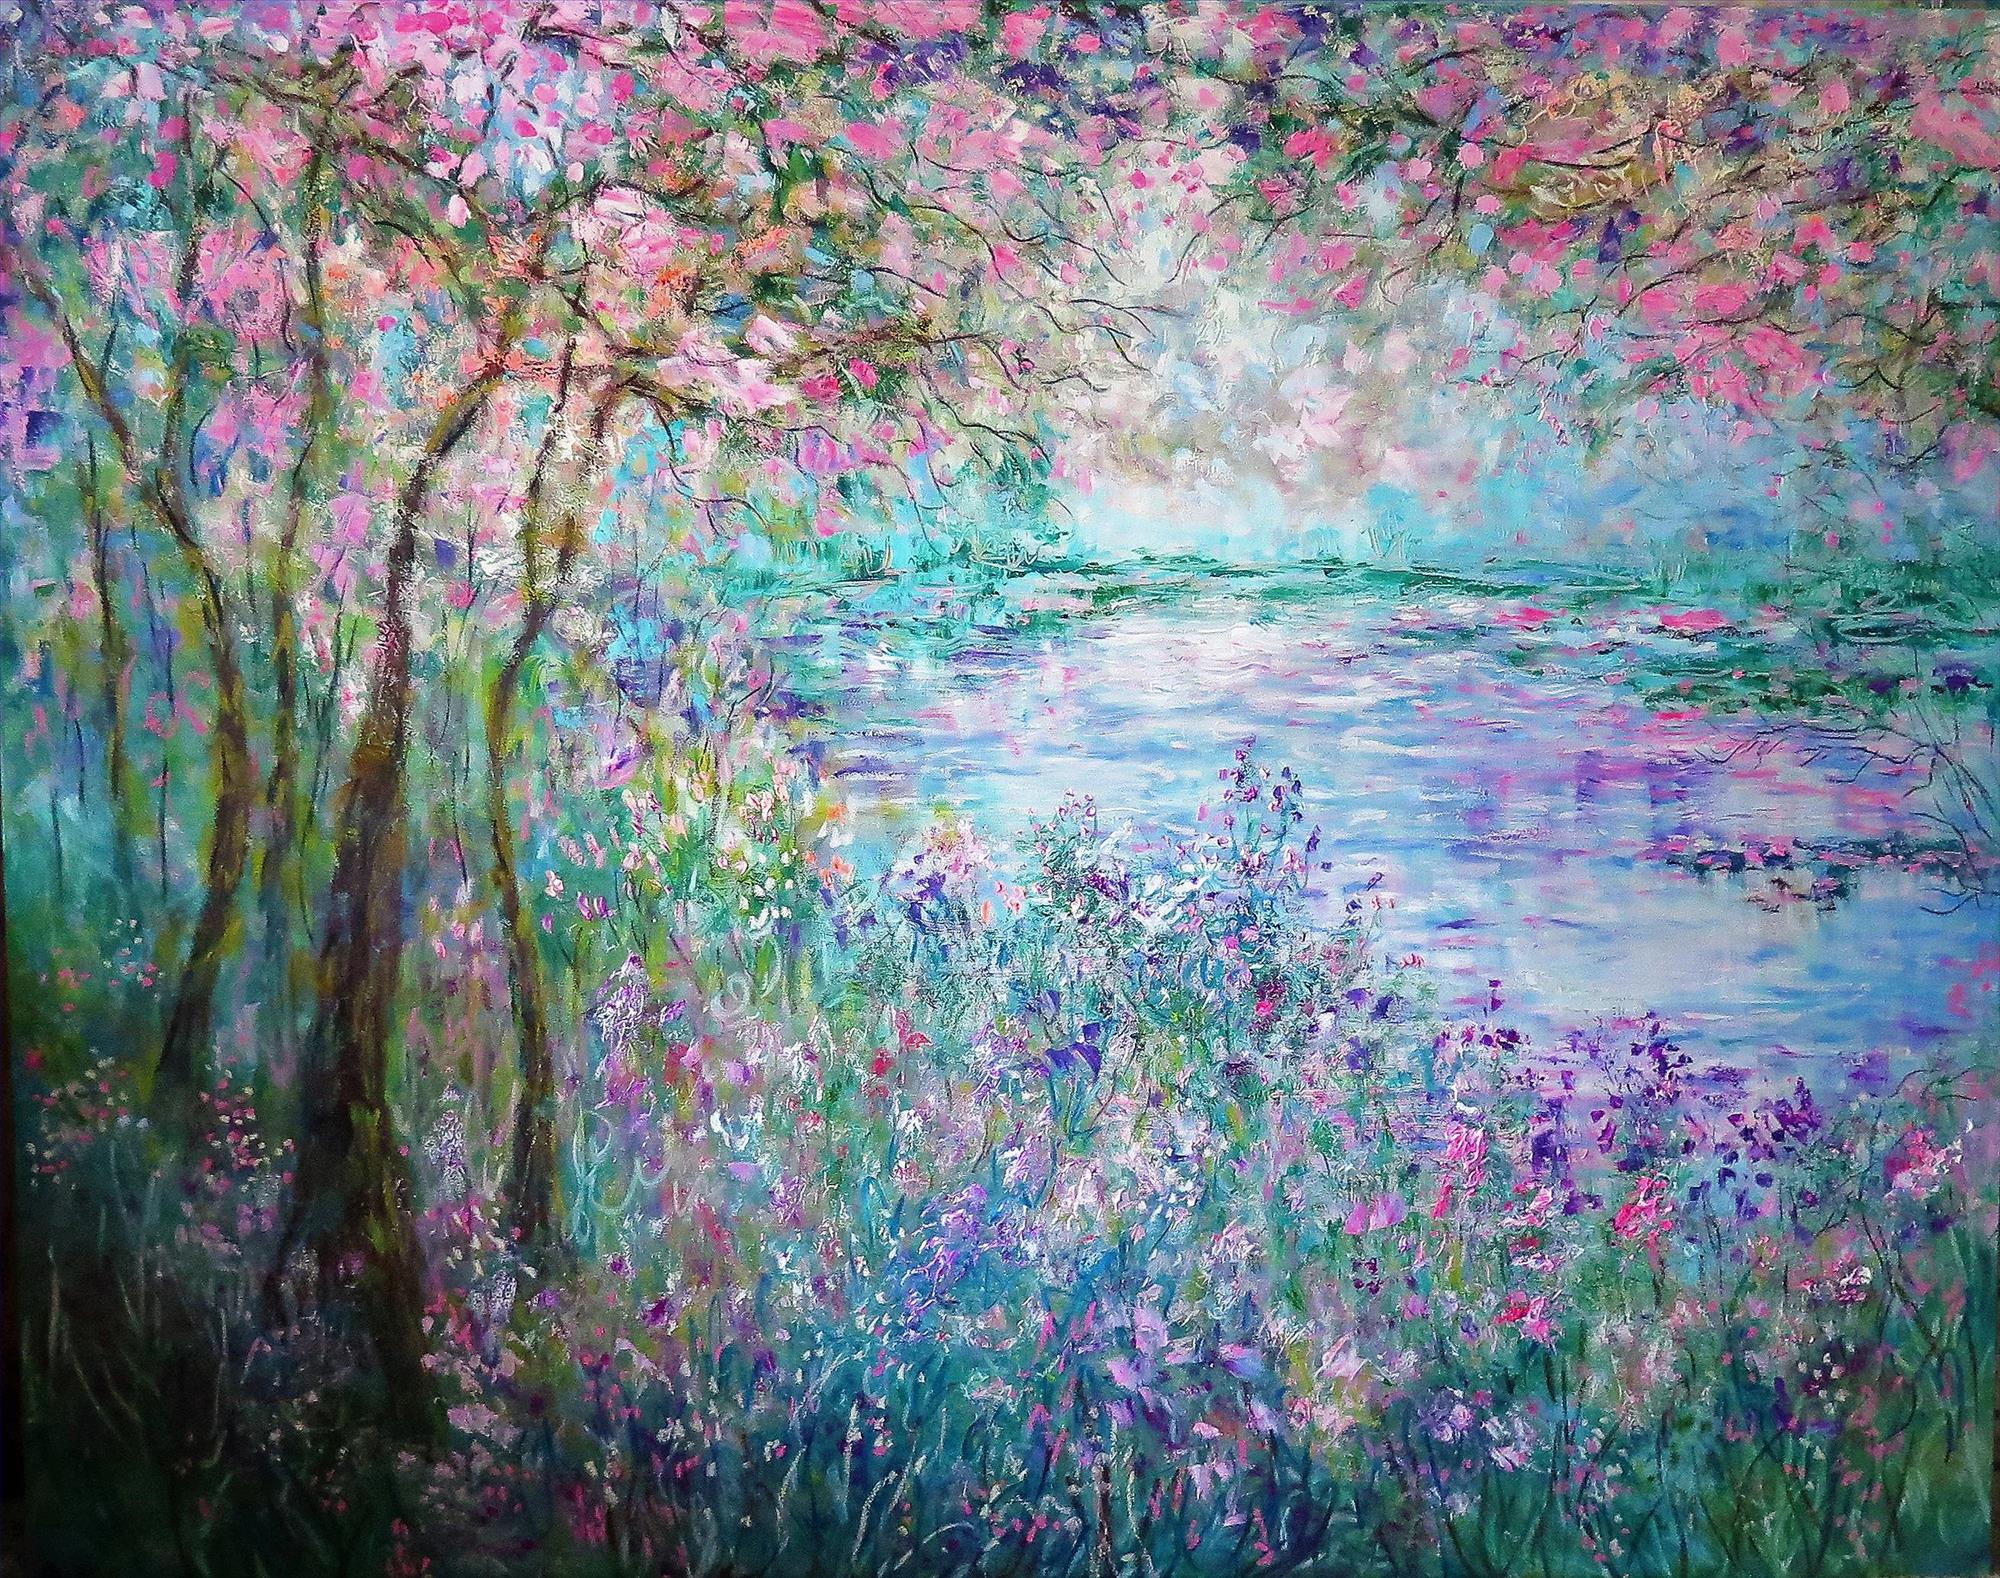 Cherry Blossom Wild Flowers Pond Trees garden decor scenery wall art nature landscape Oil Paintings